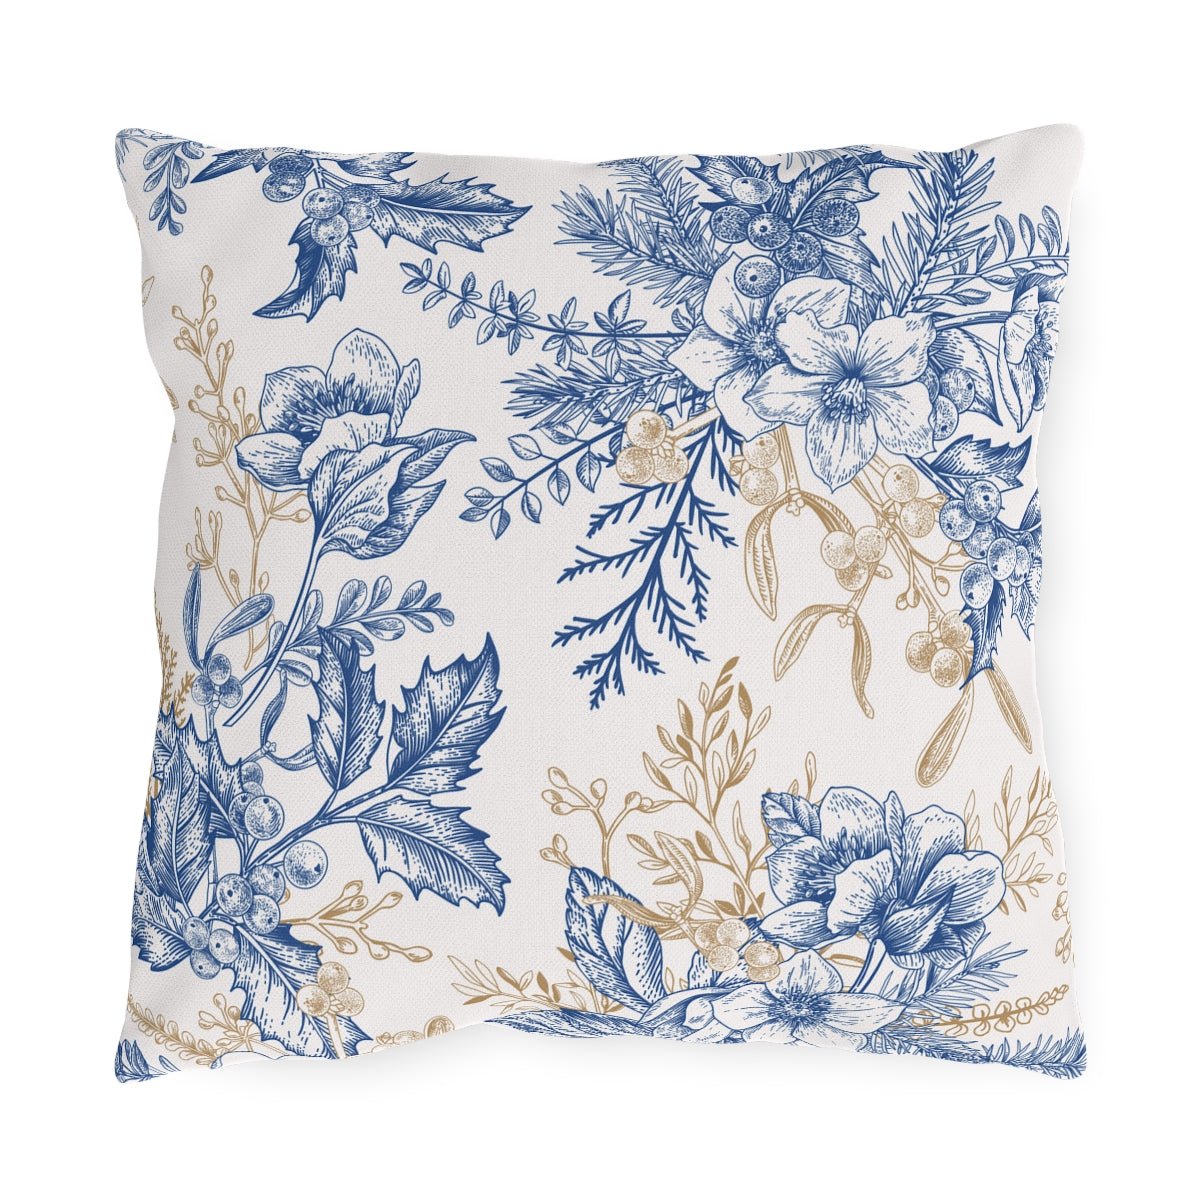 Winter Hellebore Flowers Outdoor Pillow - Puffin Lime